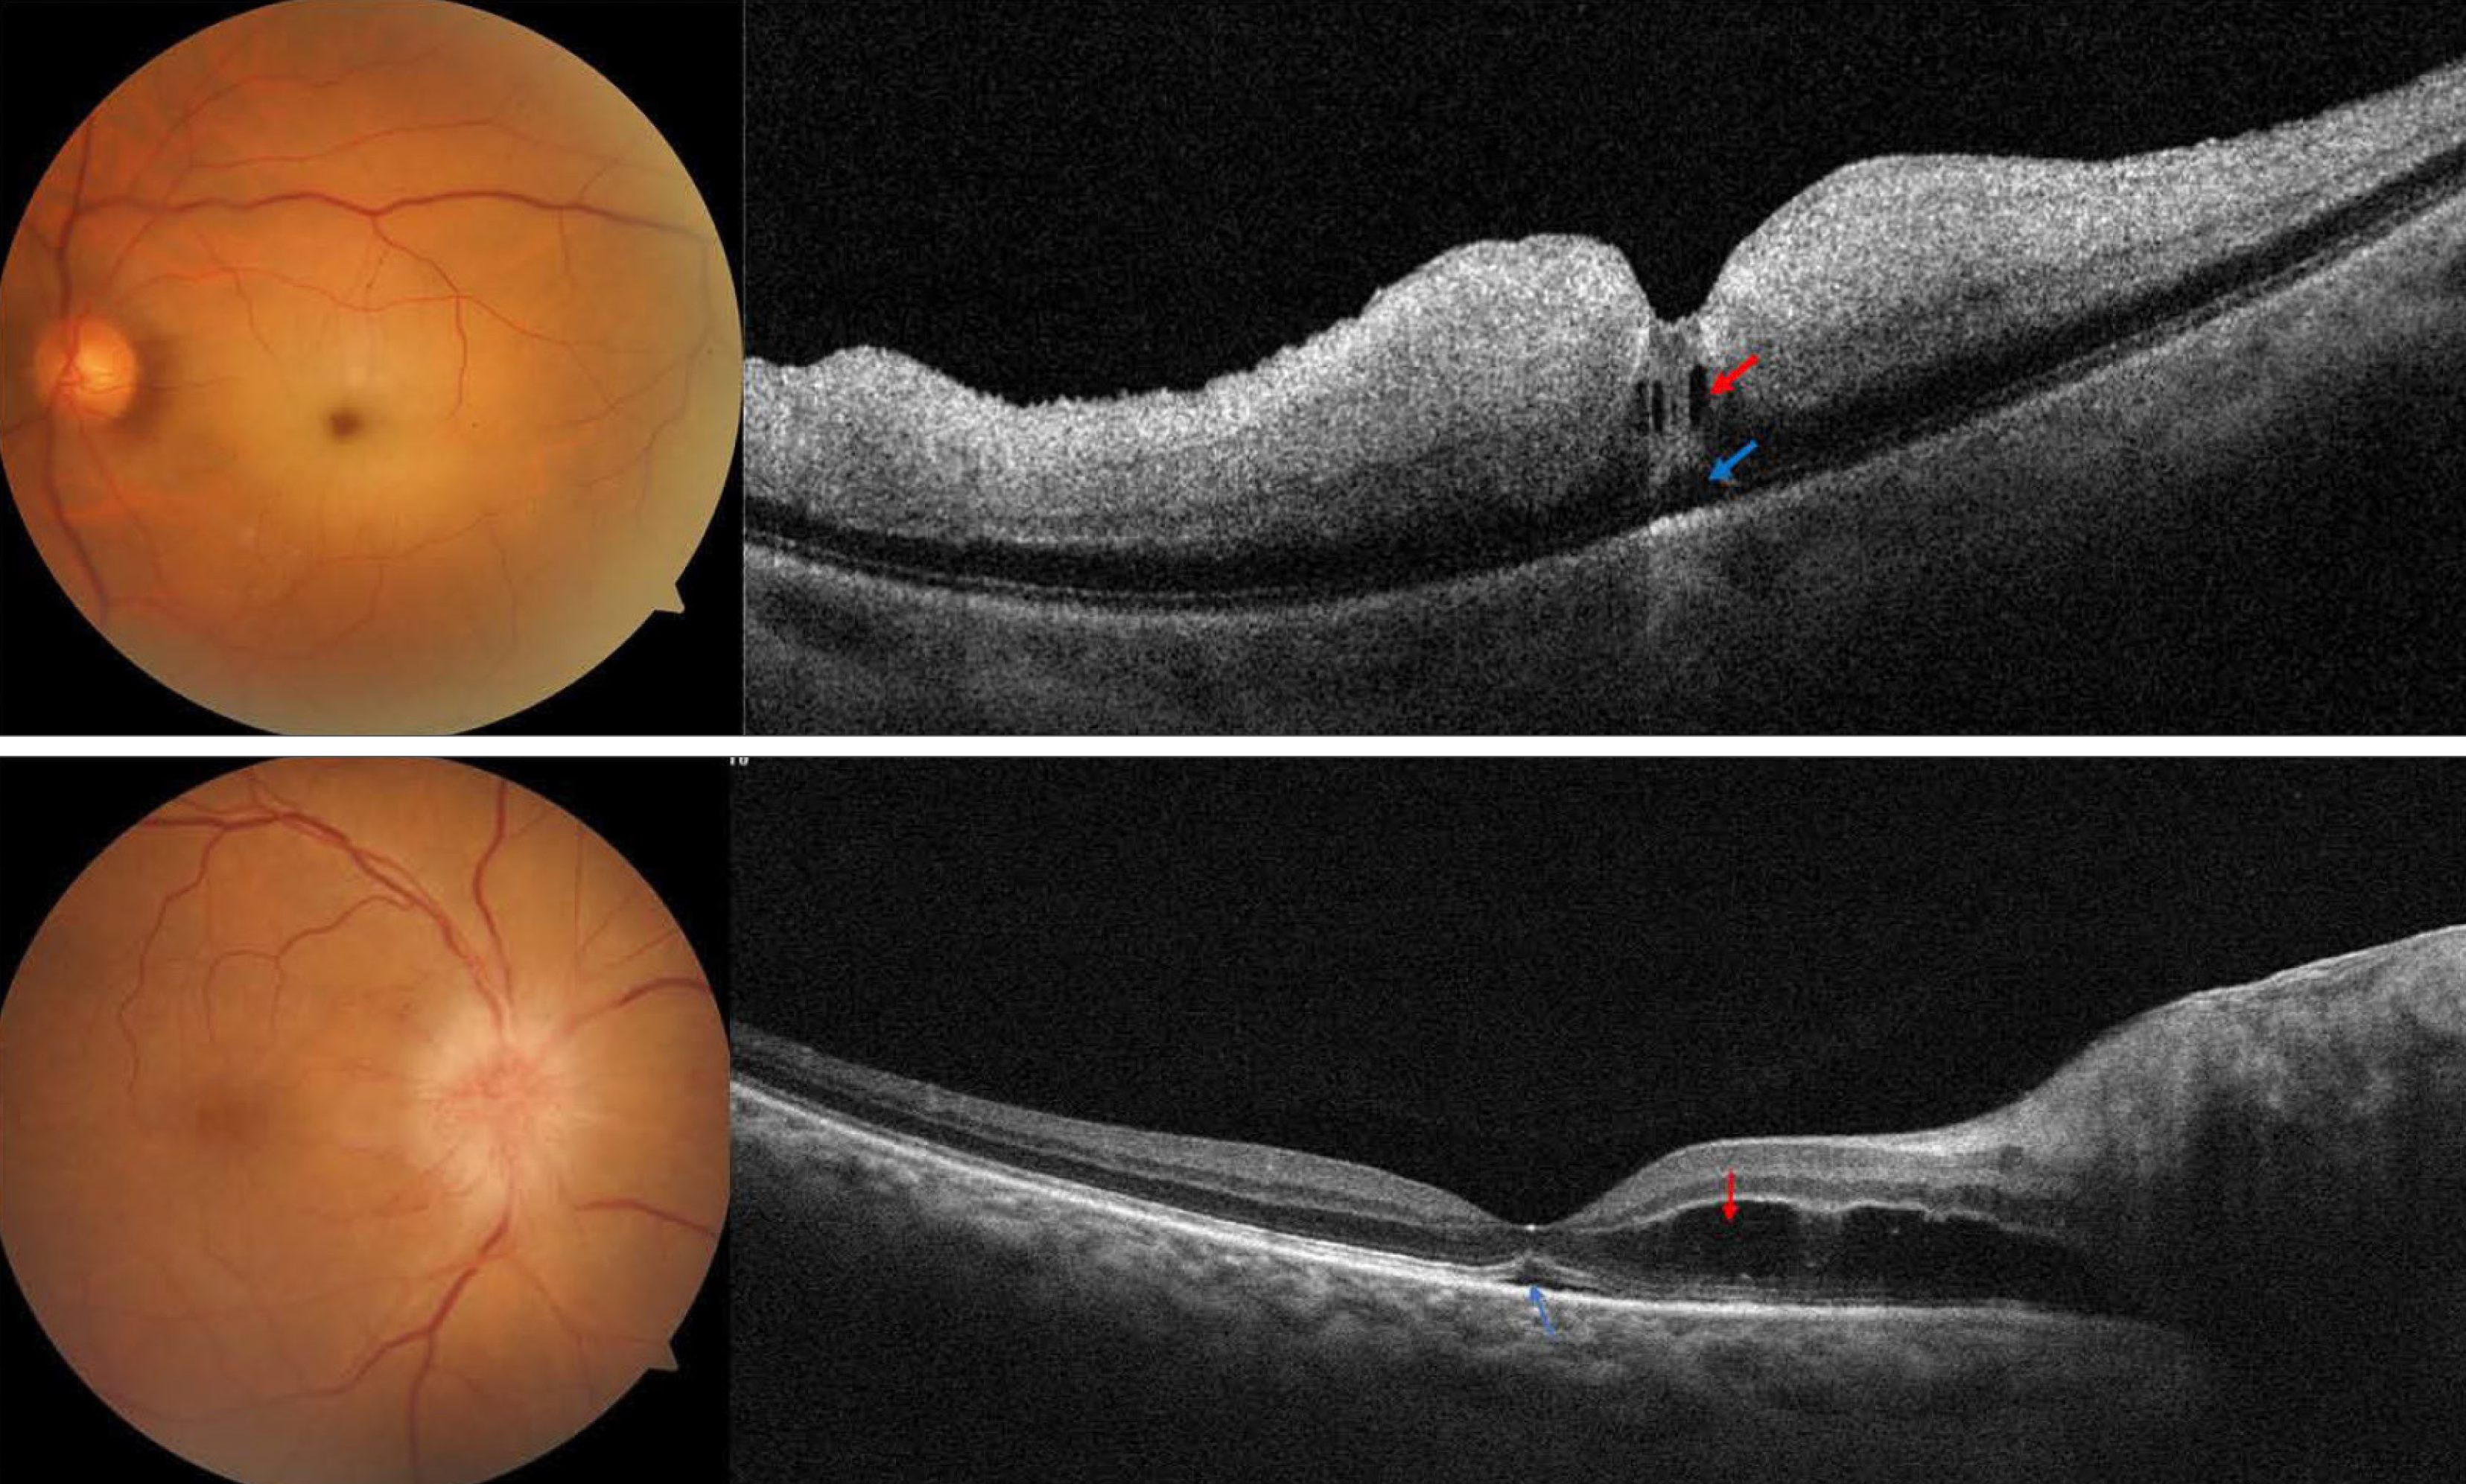 Representative cases of macular fluid in acute central retinal artery occlusion (top) and acute non-arteritic anterior ischemic optic neuropathy, from the study. Evidence of intraretinal fluid (red arrow) and subretinal fluid (blue arrow) is noted in each case.